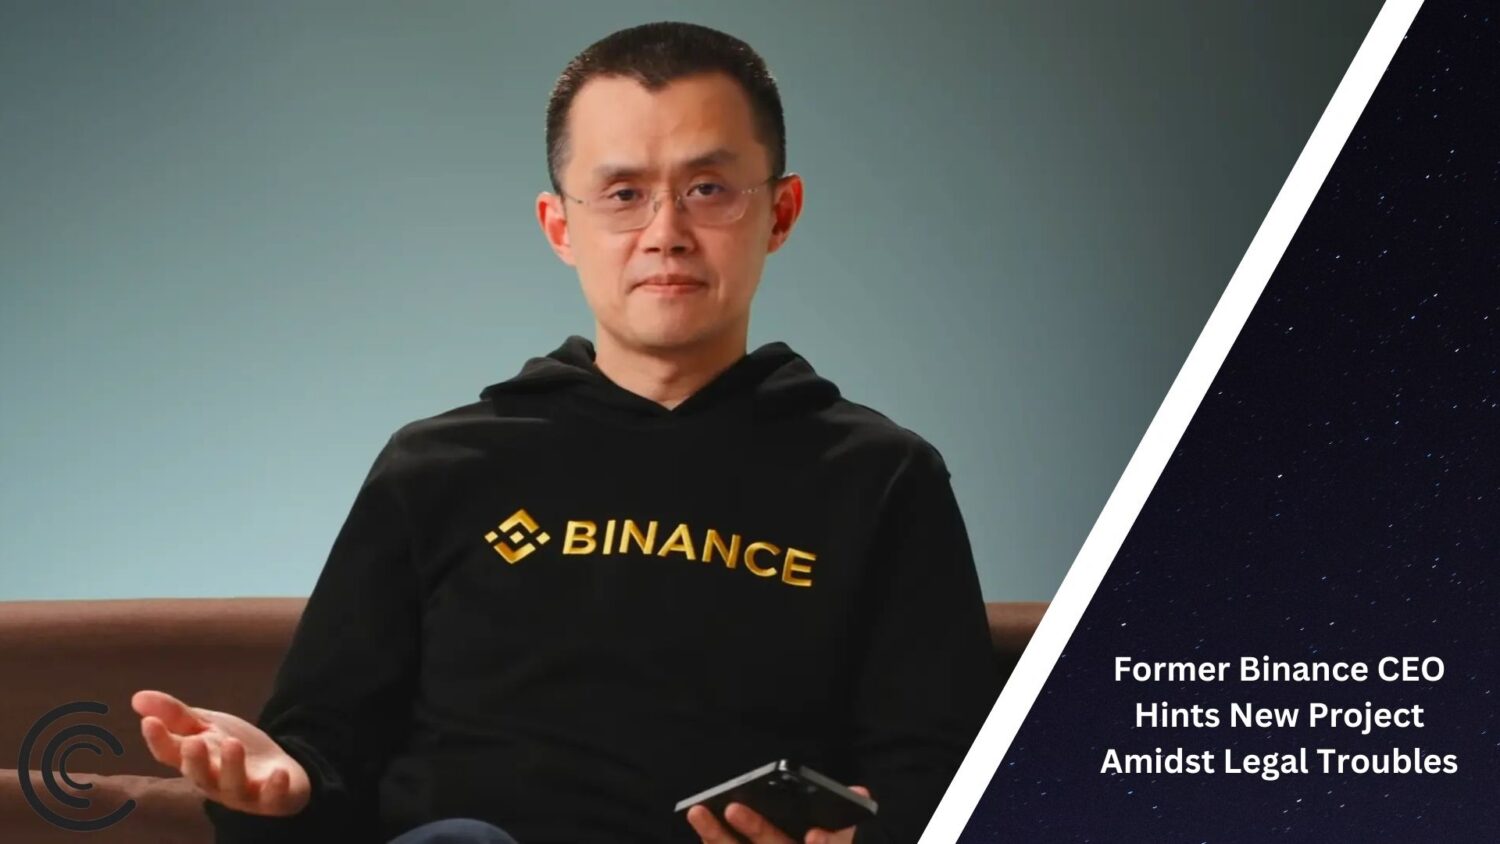 Former Binance Ceo Hints New Project Amidst Legal Troubles